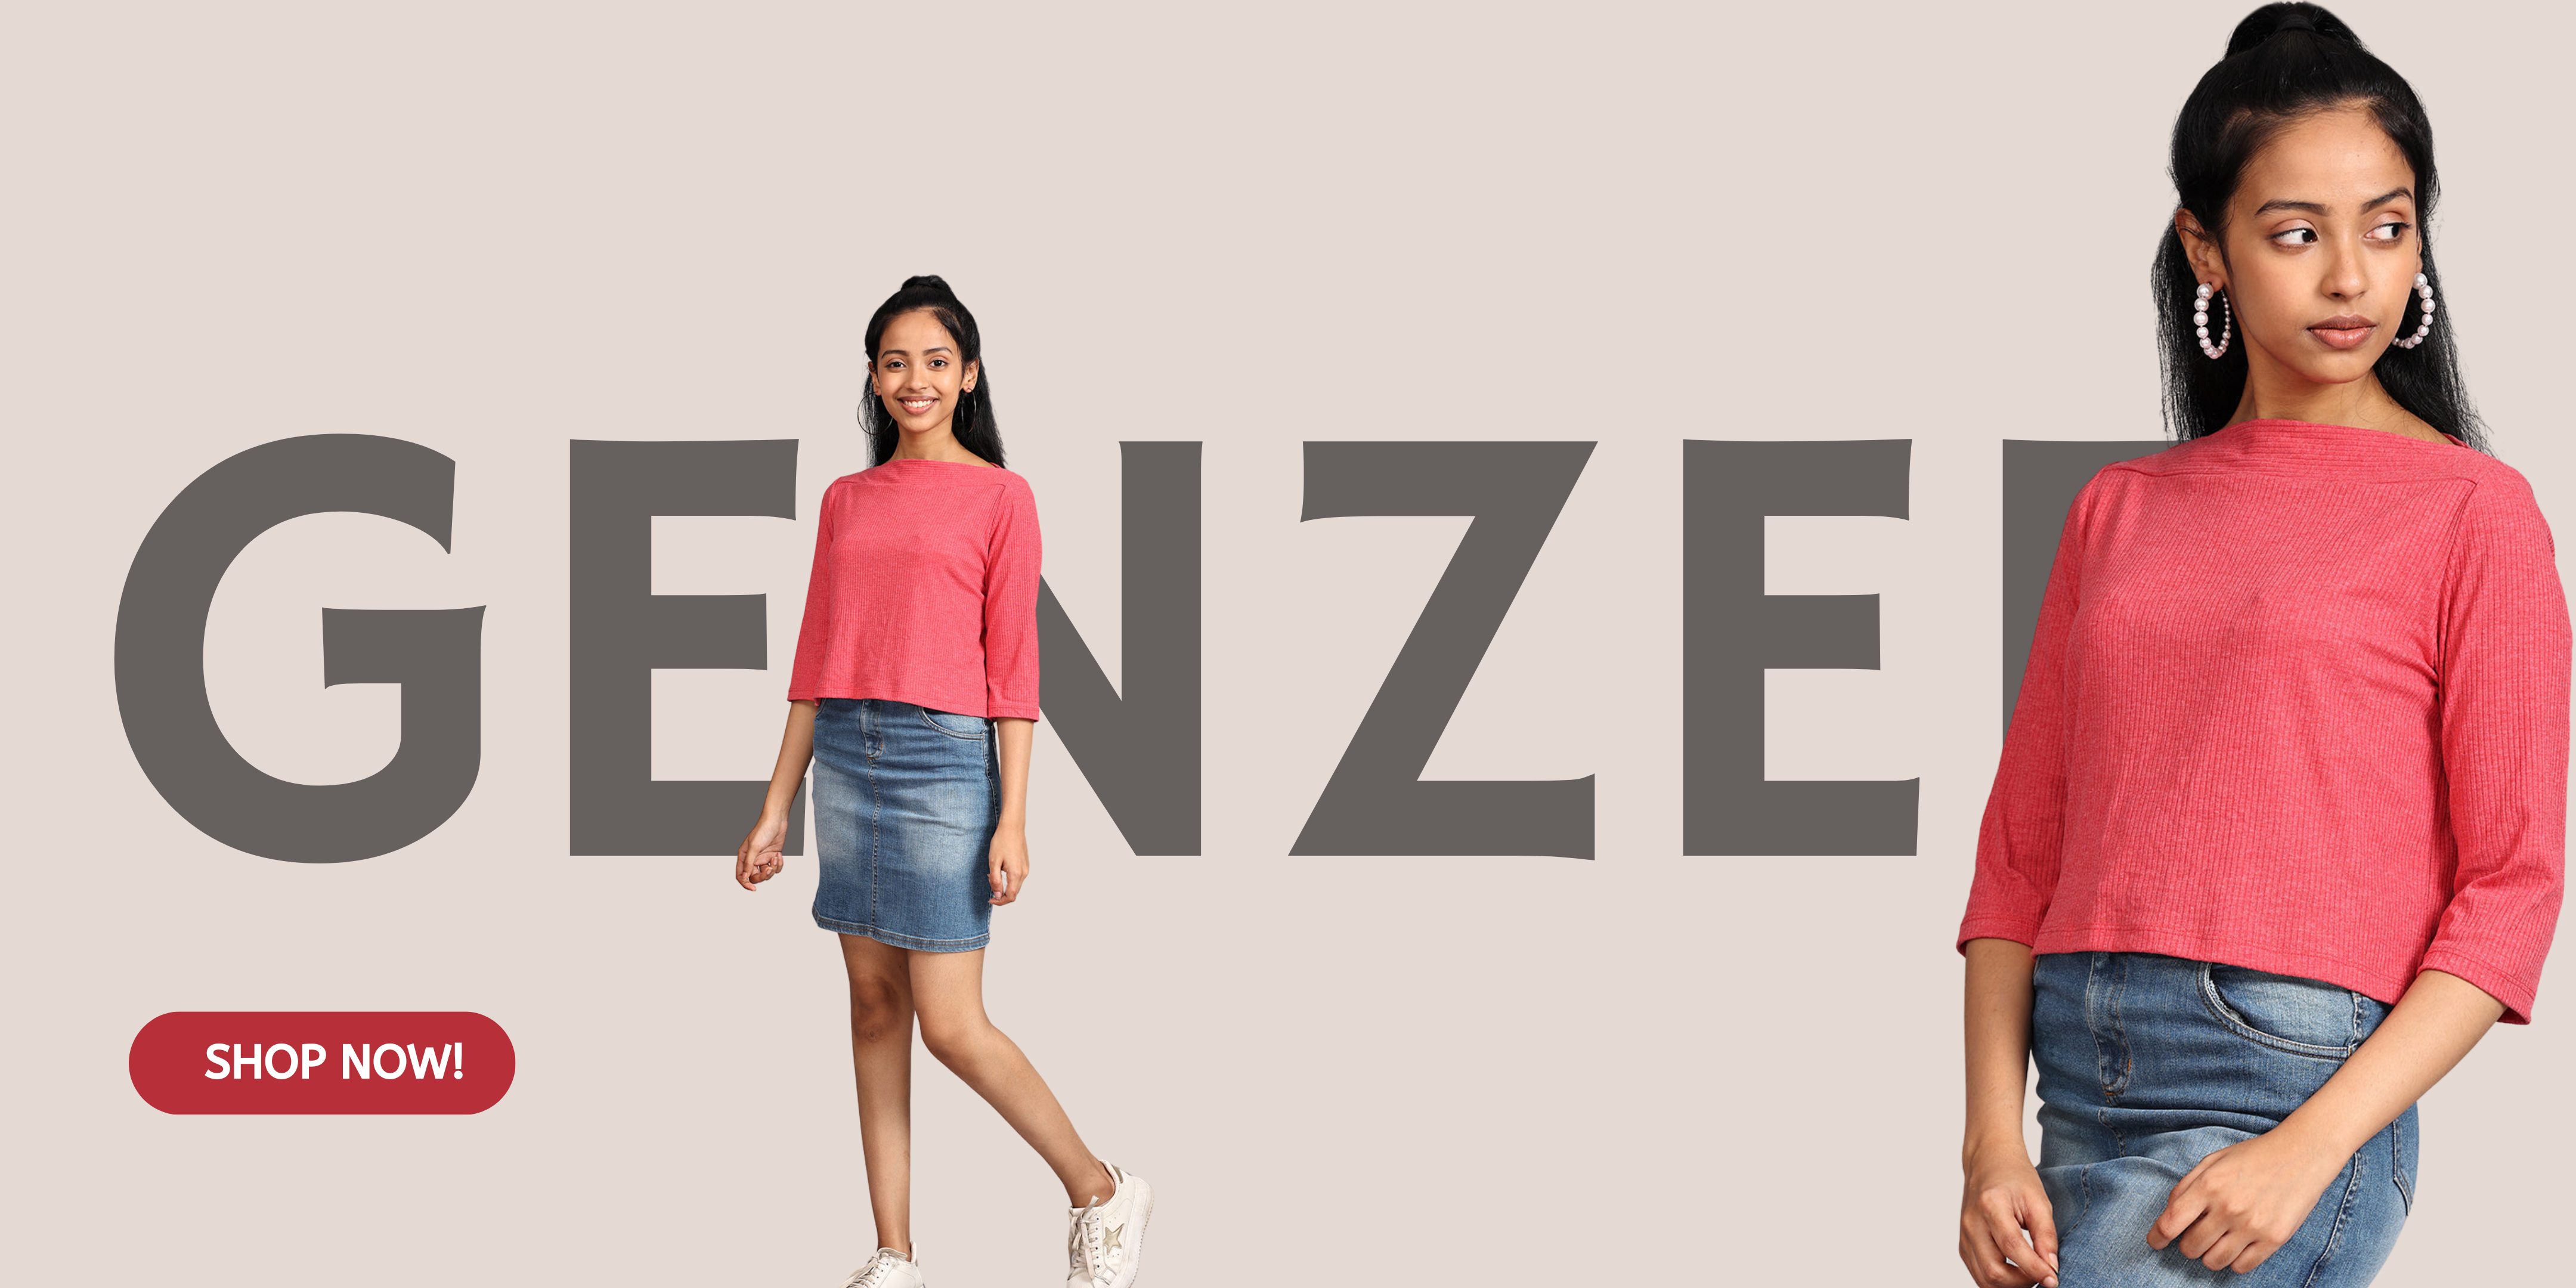 Crop Tops for Women Online: Unleash Your Inner Fashionista with Genzee